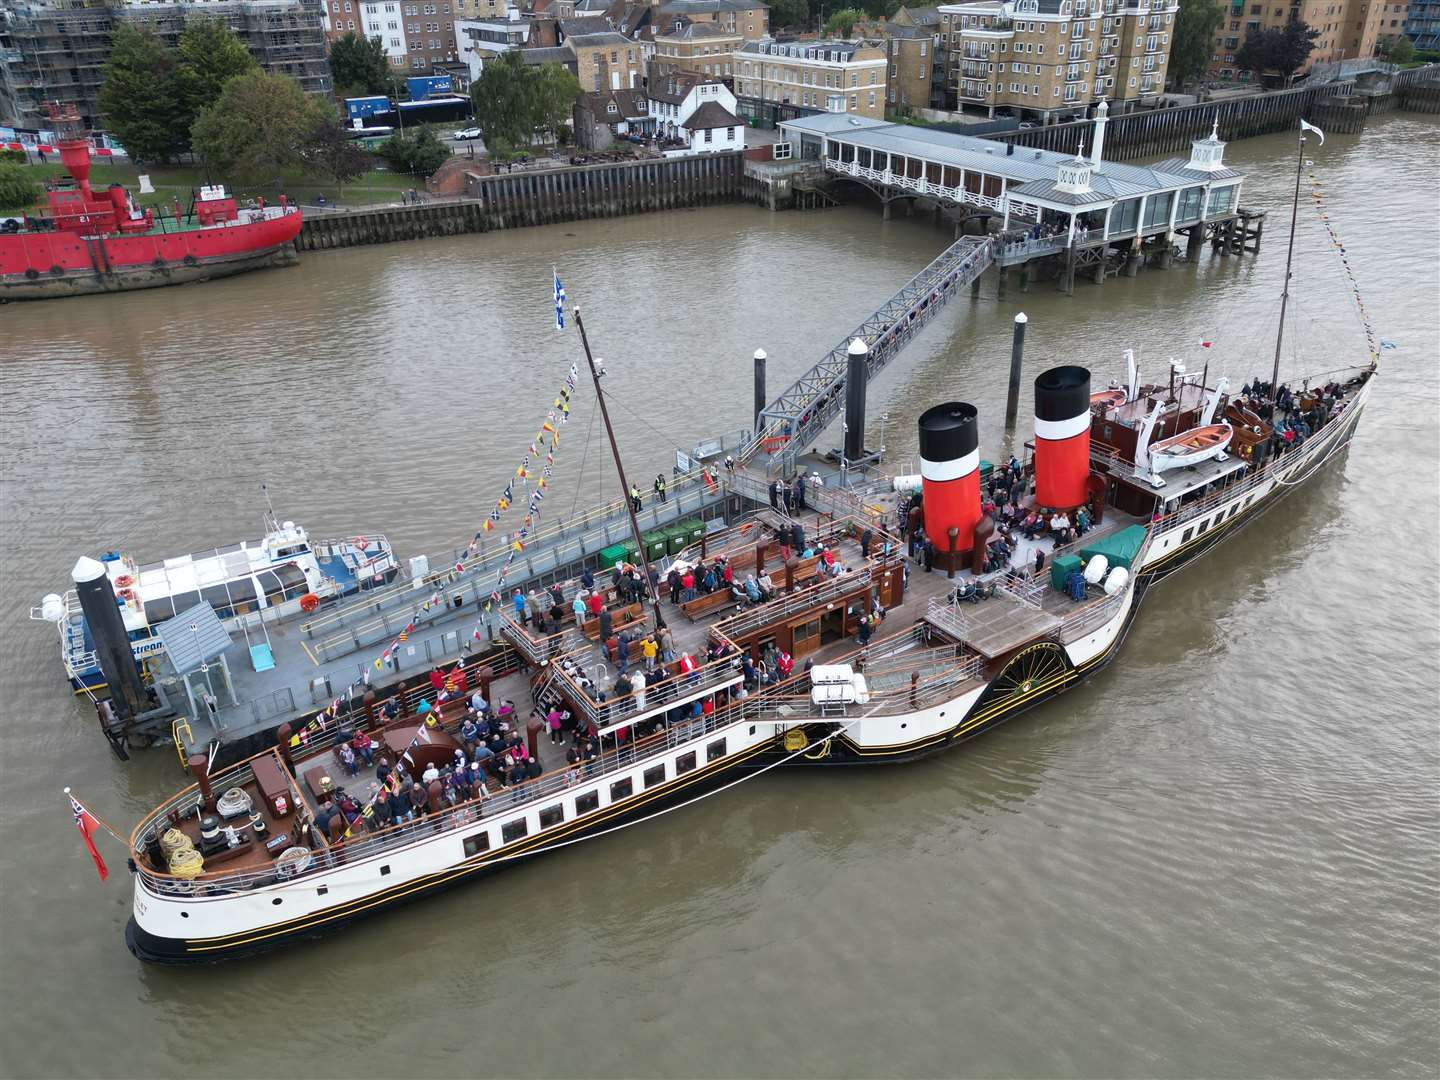 Paddle steamer Waverley has arrived in Gravesend. Picture: Jason Arthur